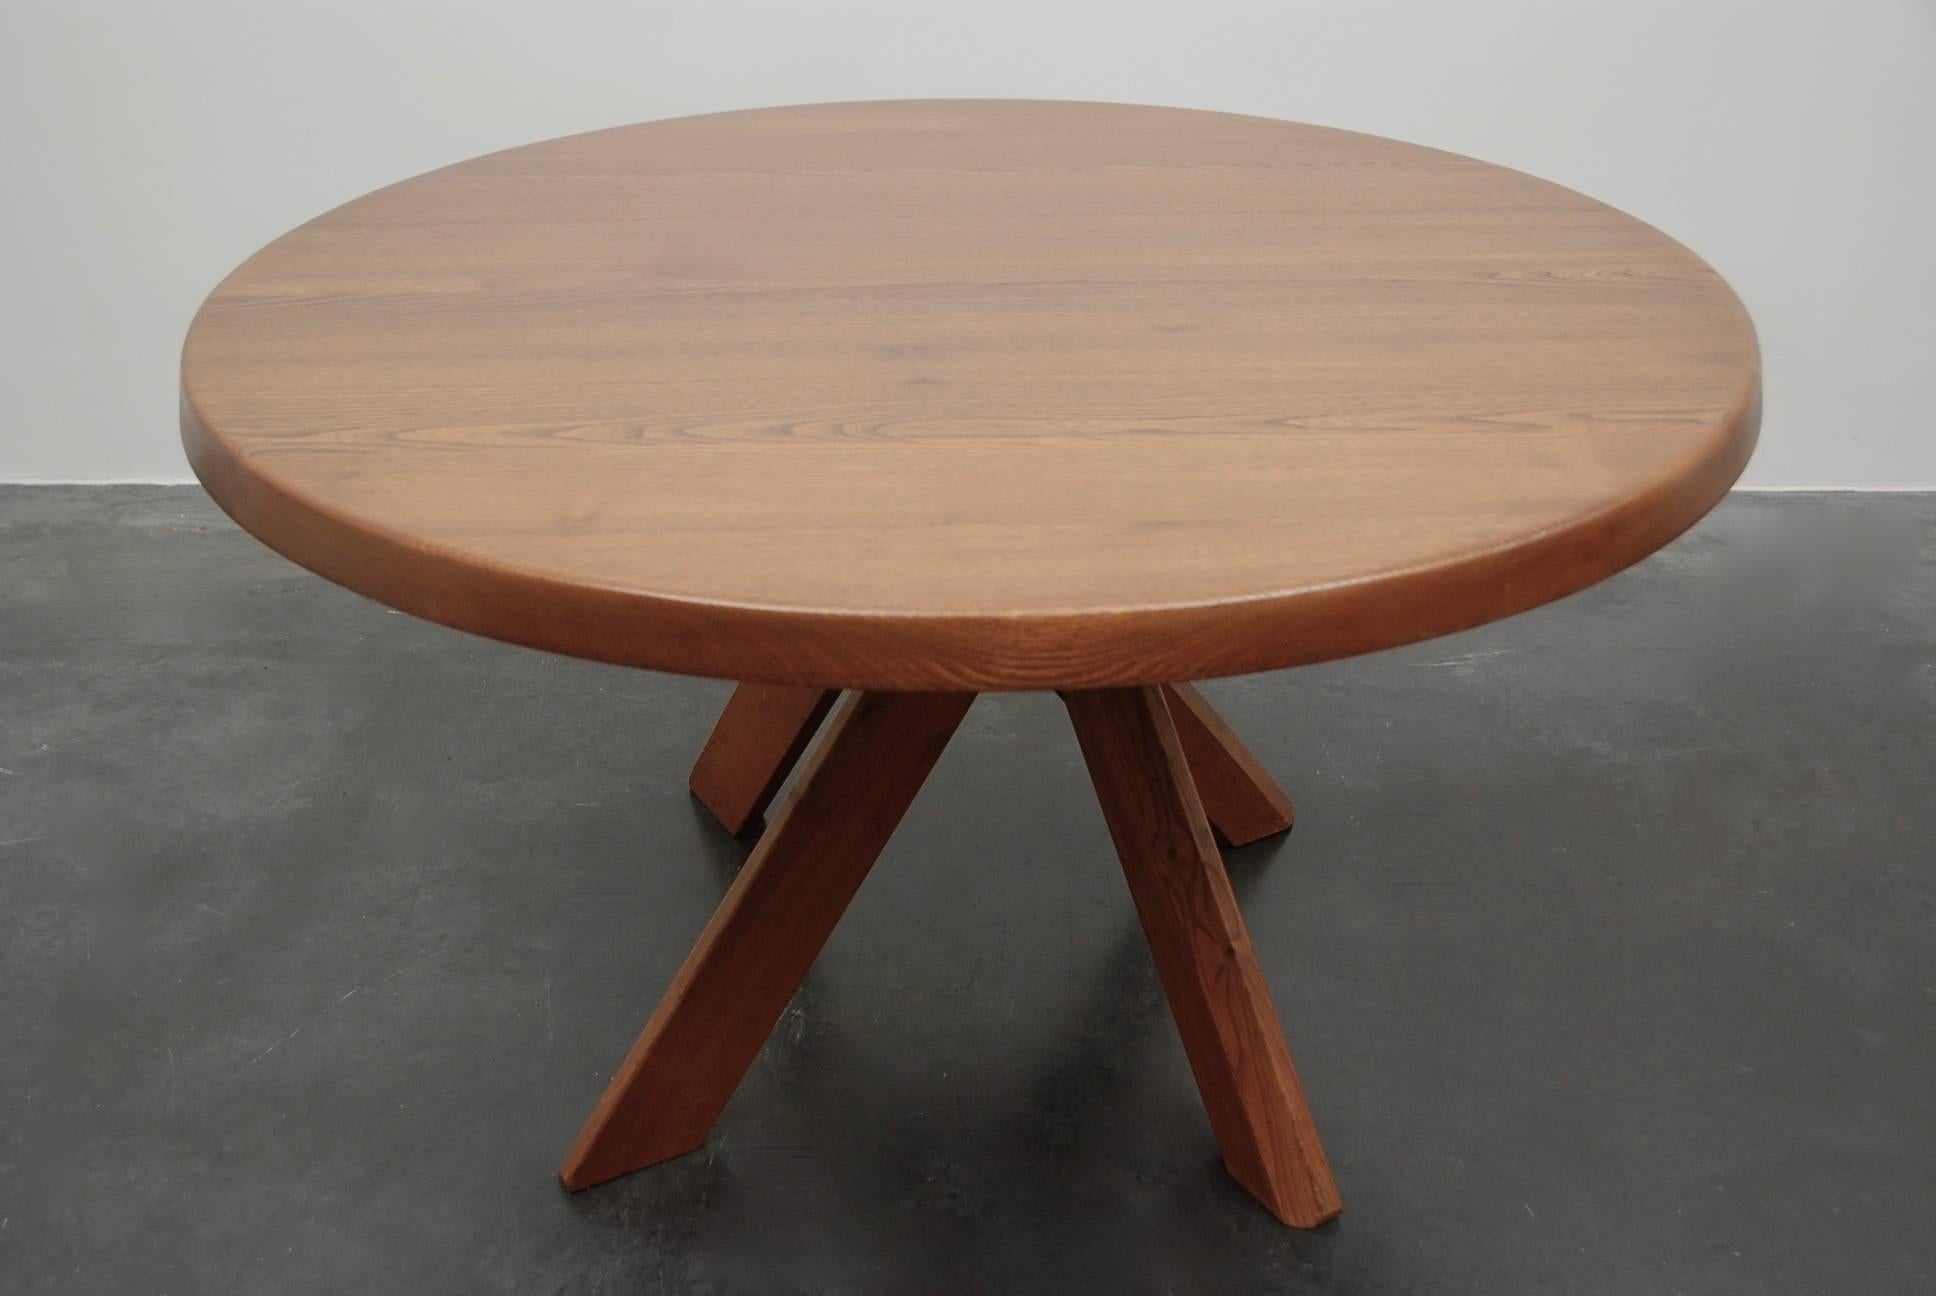 This very nice dining table, model type T21b, in solid elm is designed by master woodworker Pierre Chapo, France, 1960s.
The basic design and construction as well as the use of solid pine wood characterizes the work of Chapo.